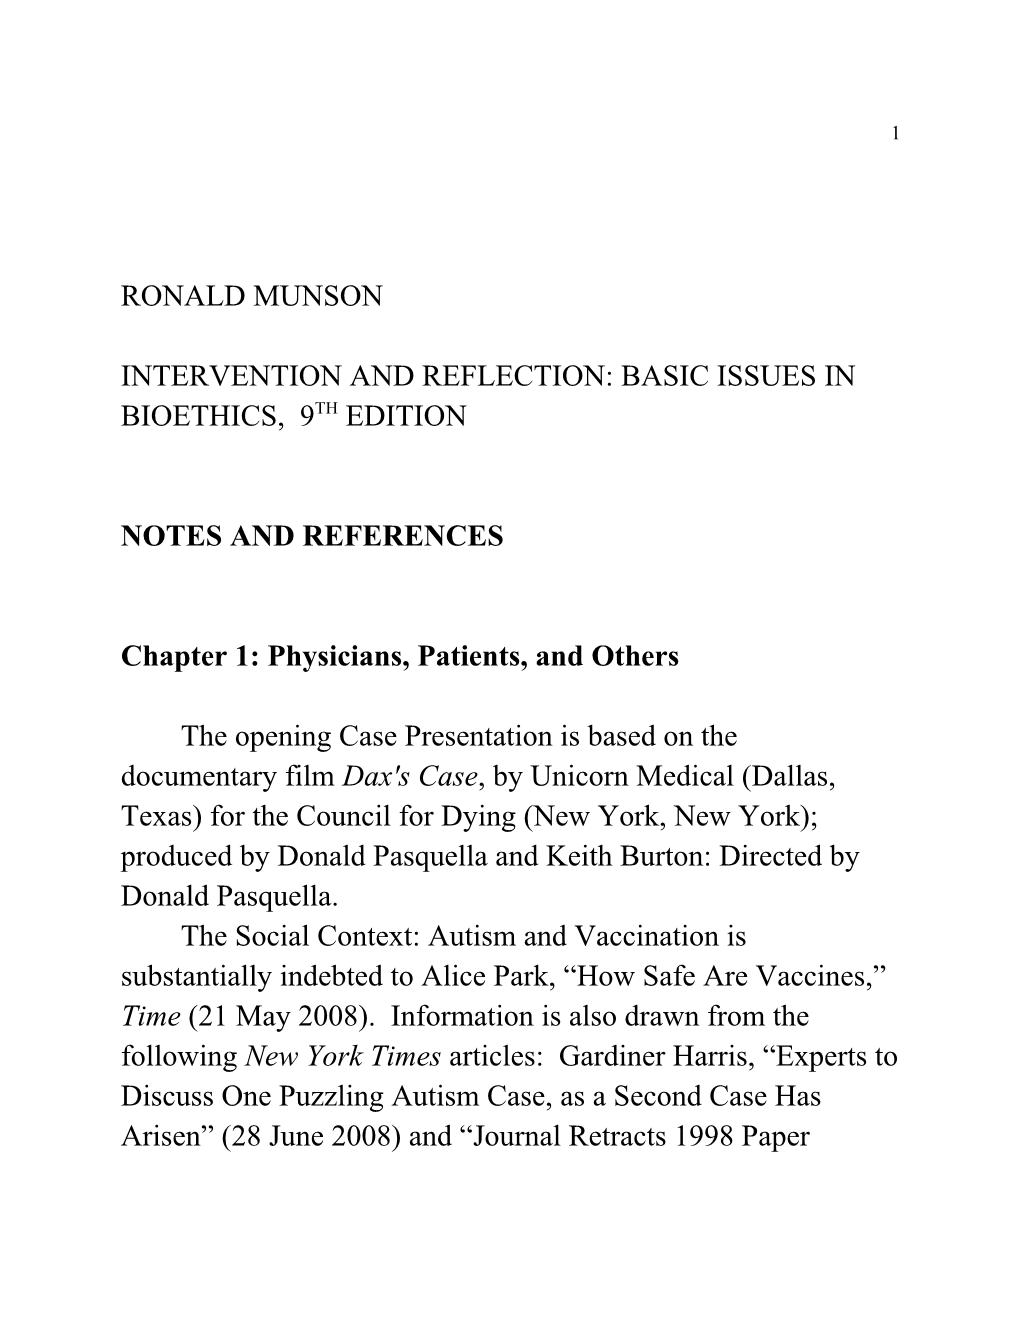 Munson; Intervention and Reflection, 8Th Ed